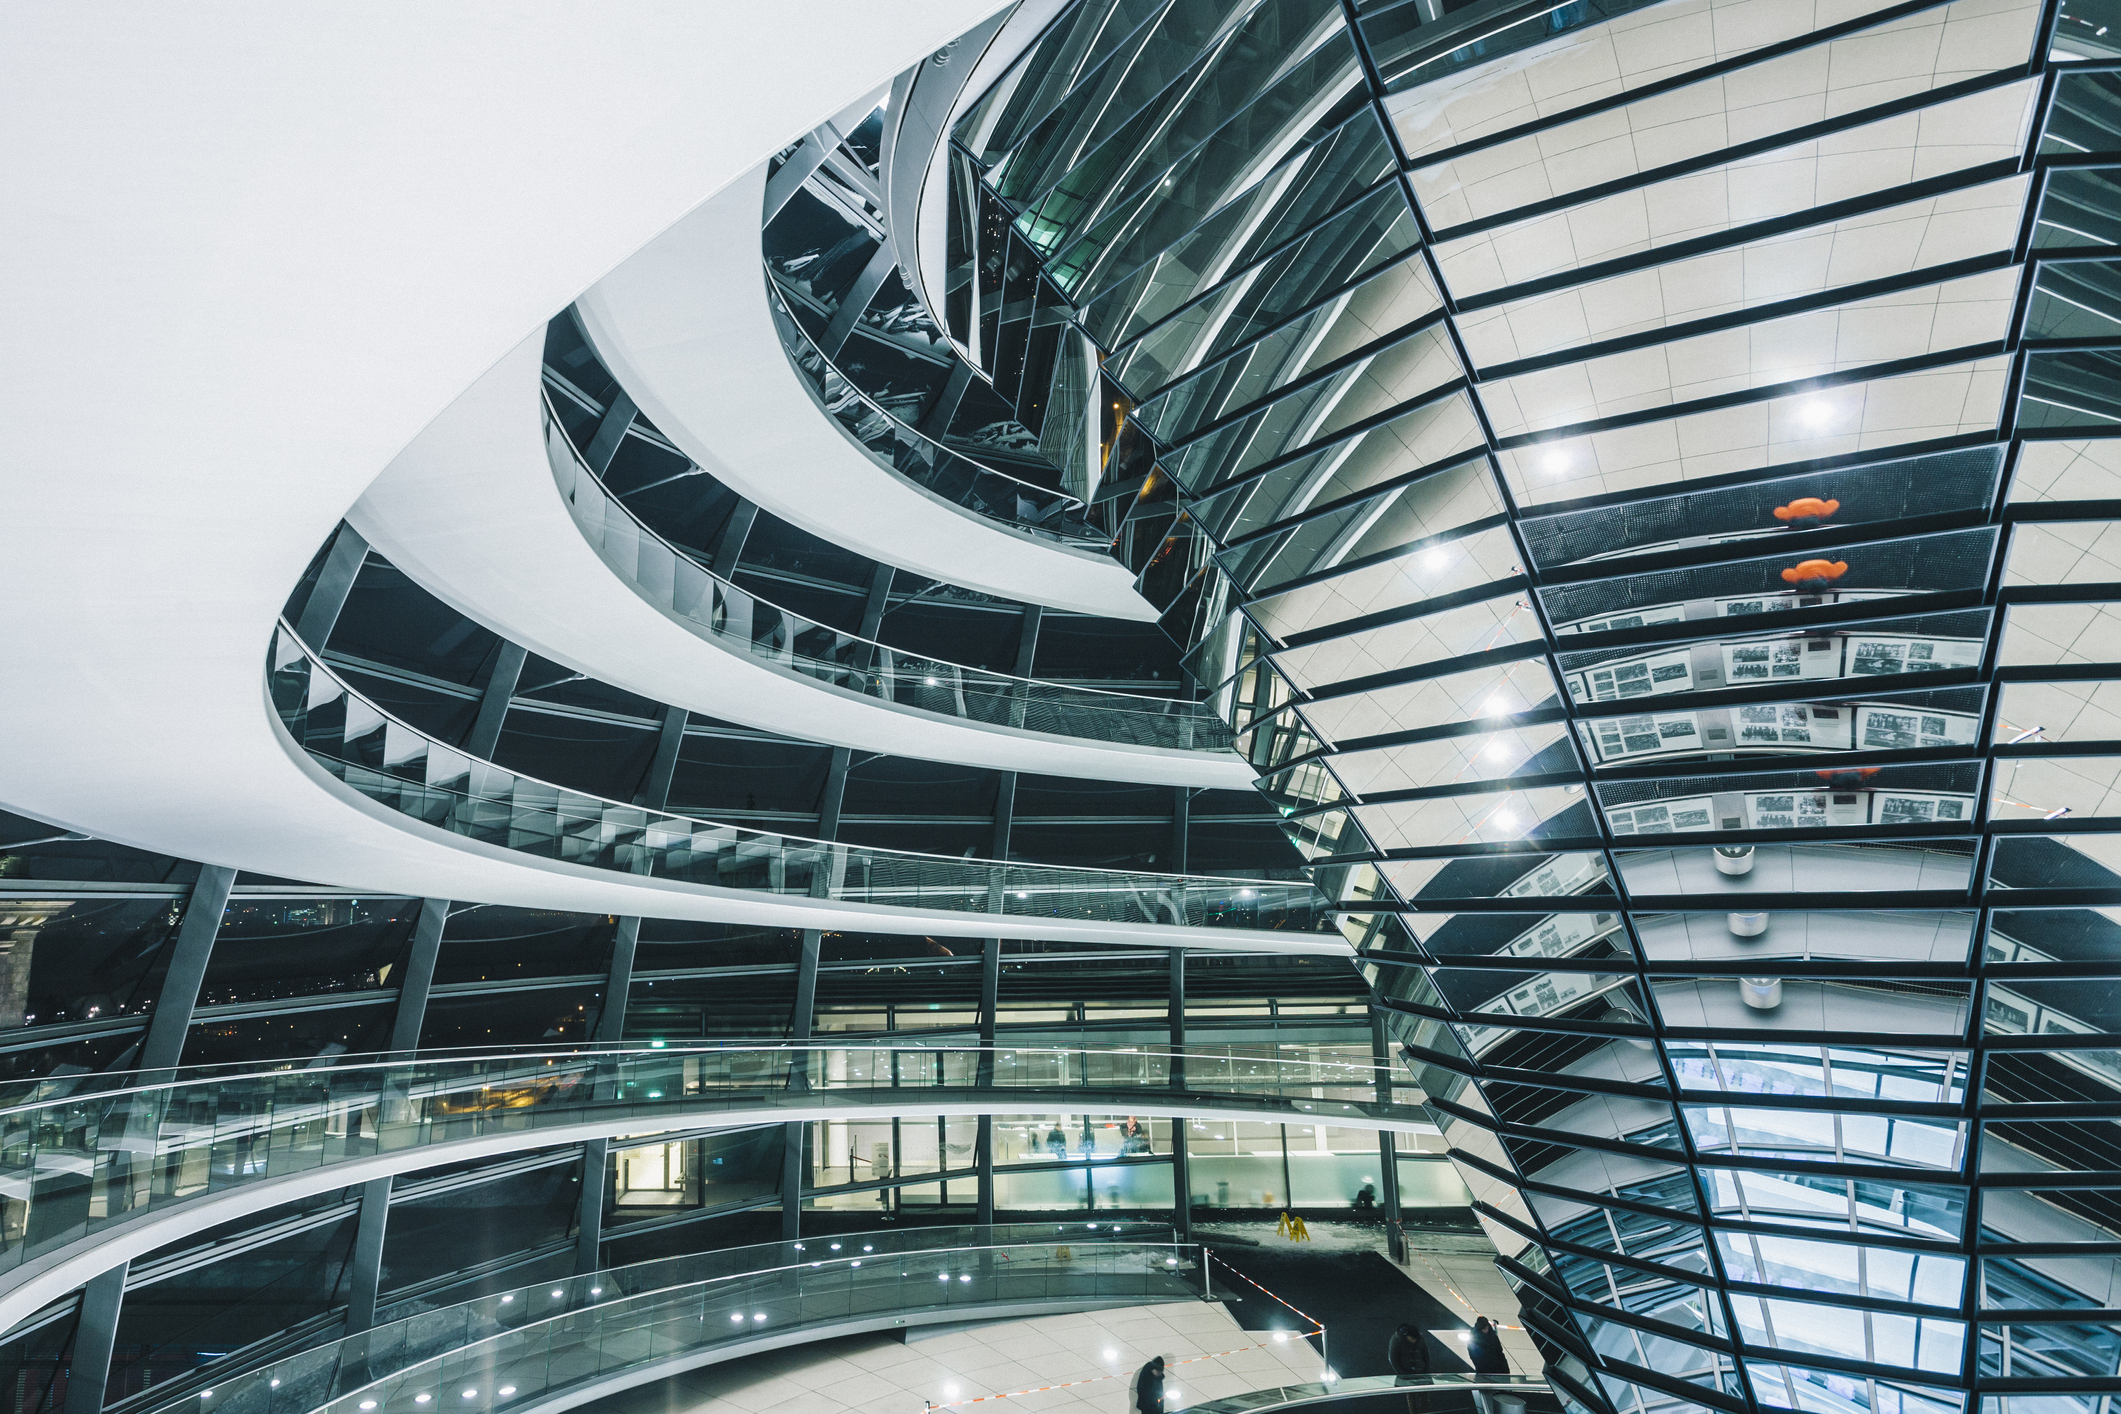 Inside the Reichstag glass dome building in Berlin, Germany